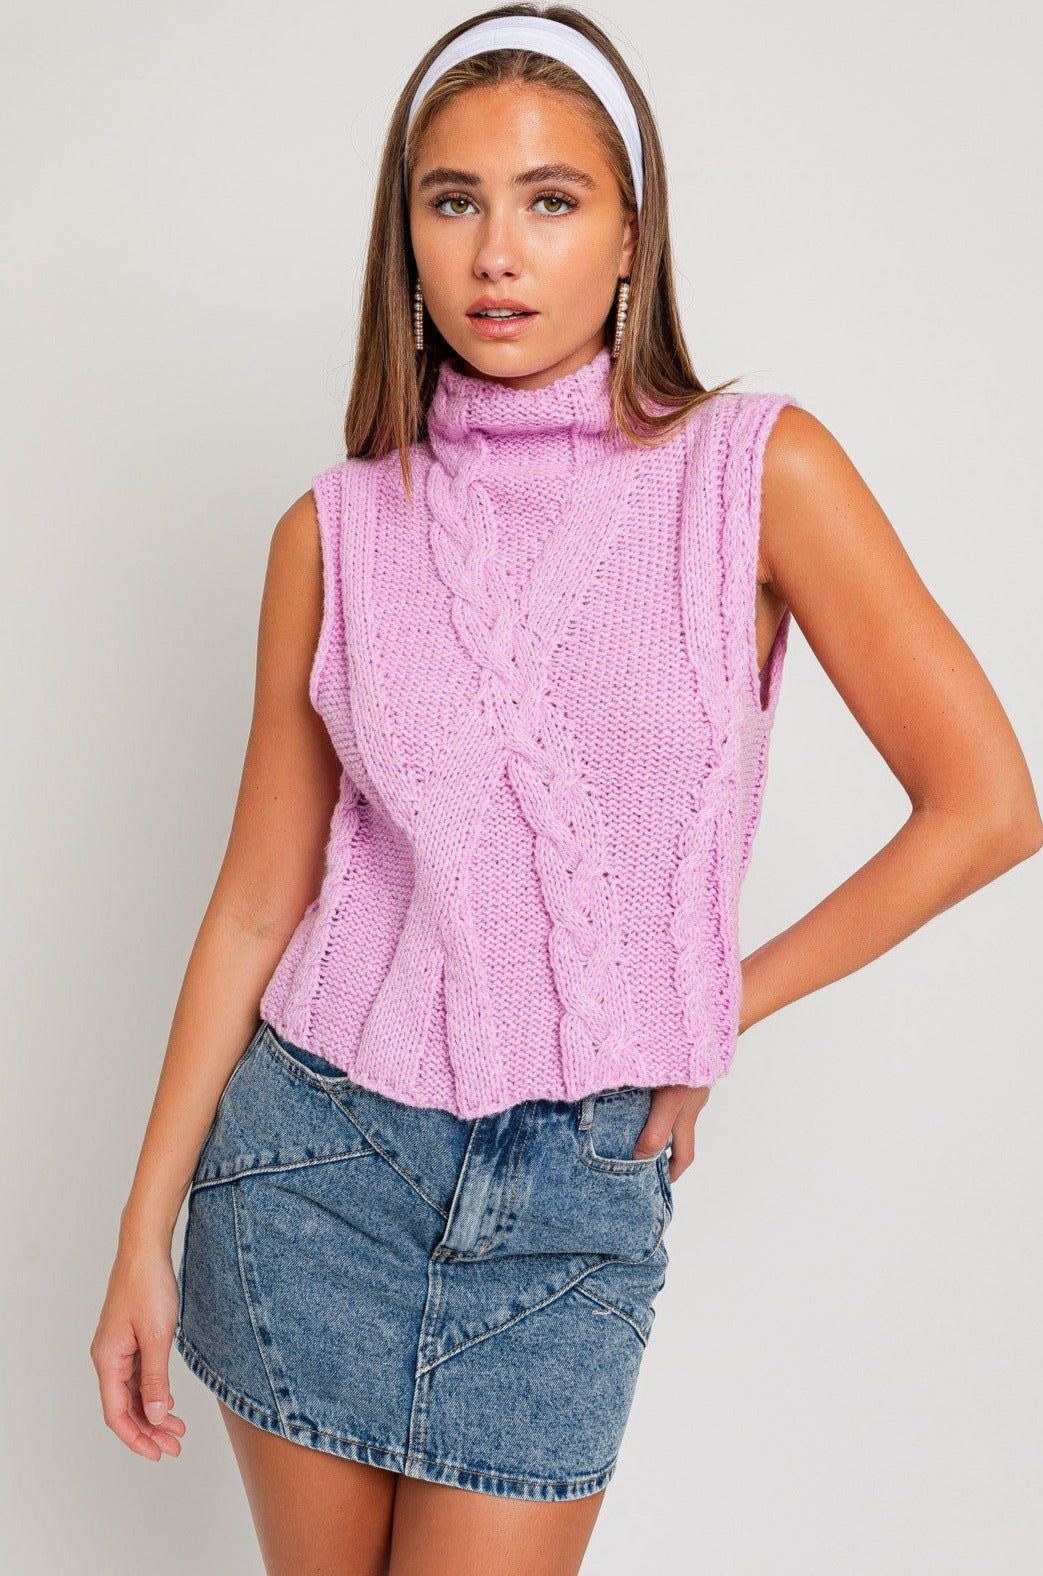 Polly Sweater Top